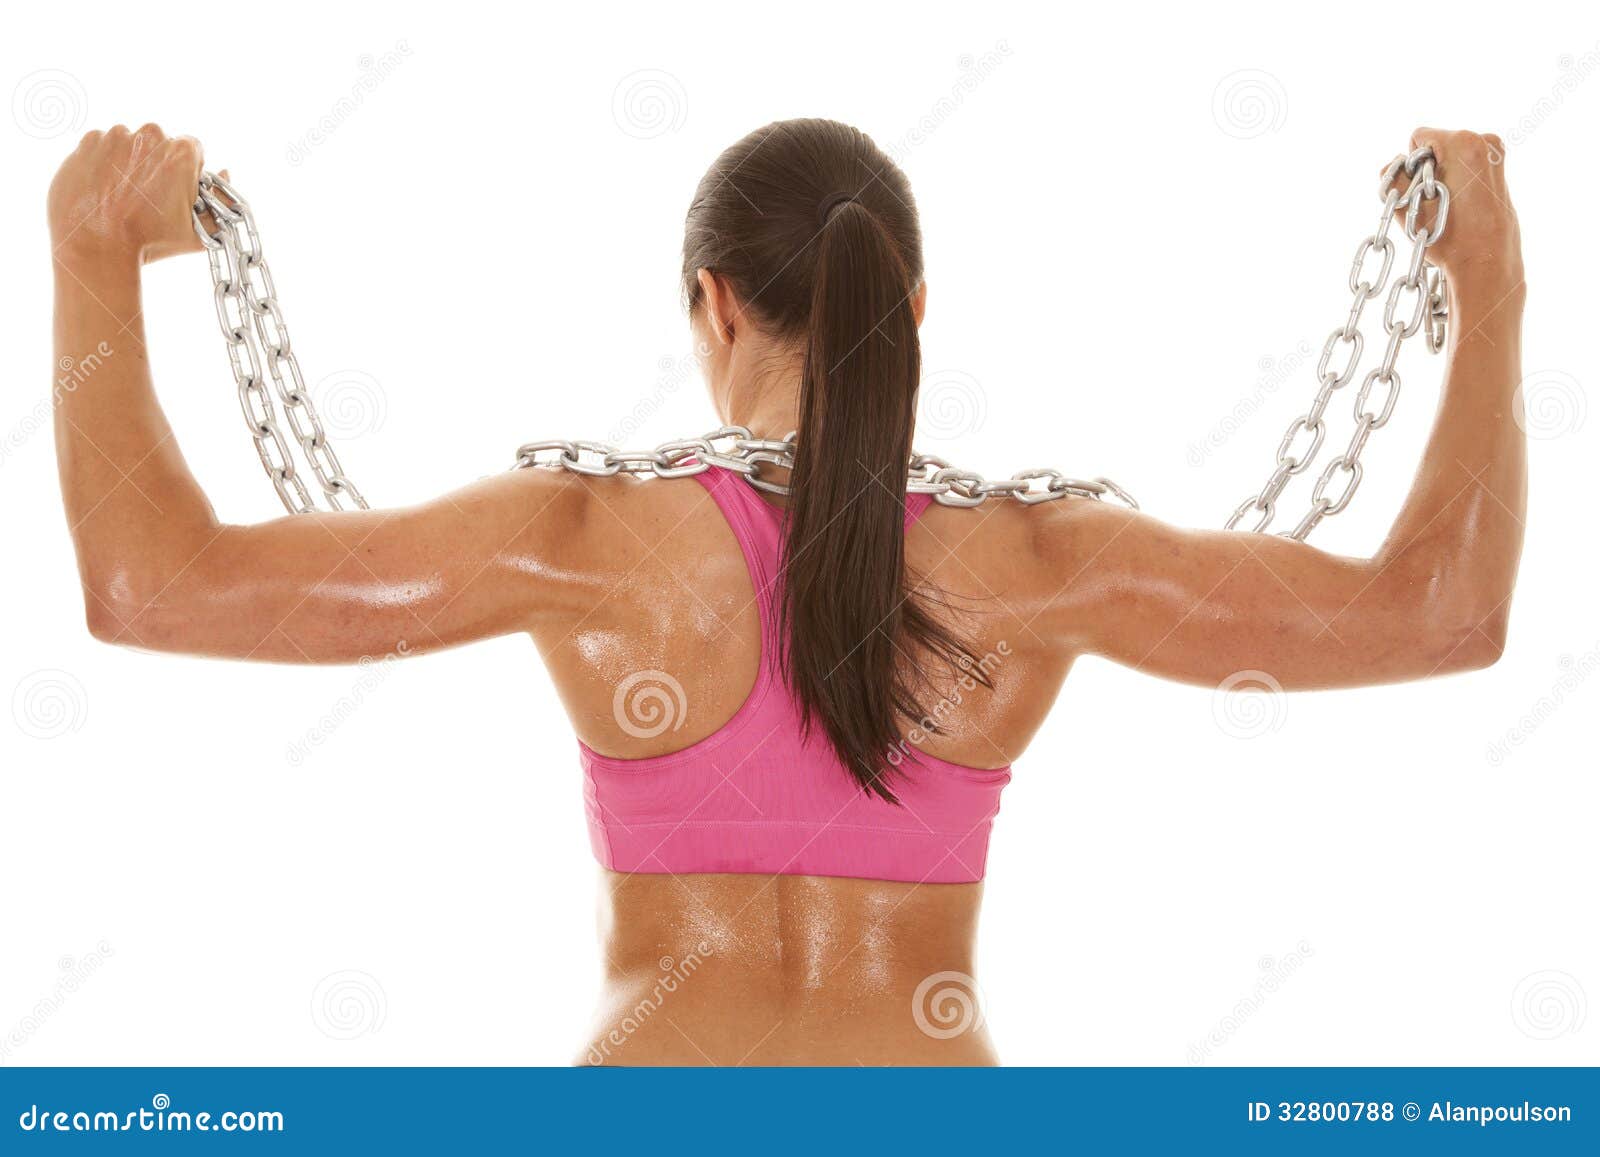 https://thumbs.dreamstime.com/z/woman-pink-sports-bra-chain-back-flex-sweat-all-over-her-body-working-out-32800788.jpg